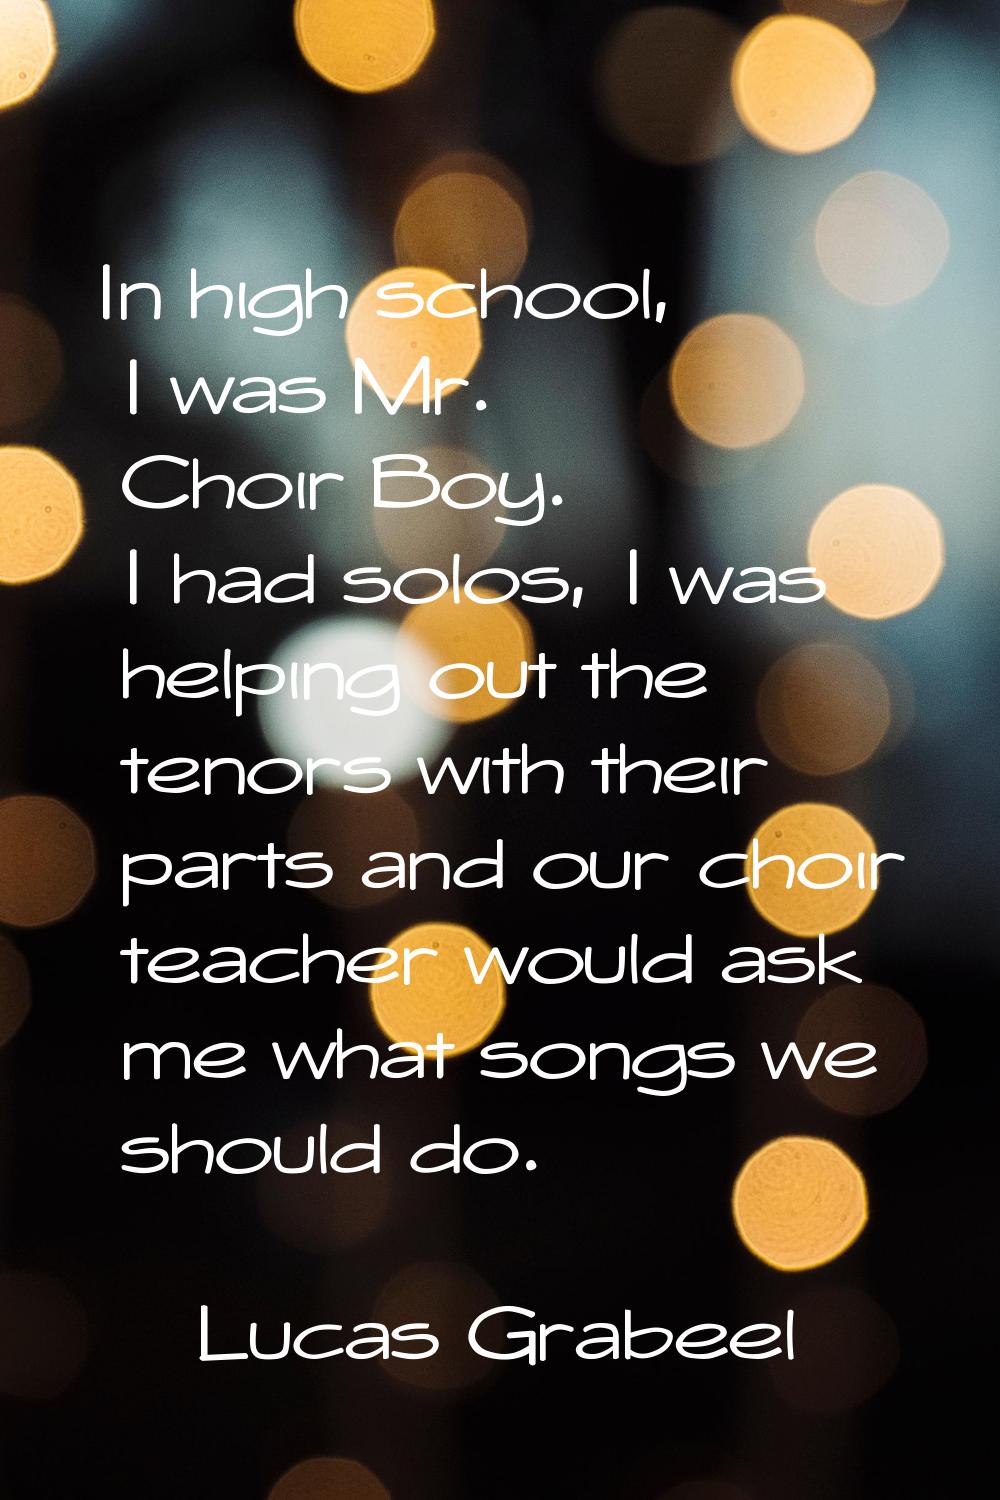 In high school, I was Mr. Choir Boy. I had solos, I was helping out the tenors with their parts and